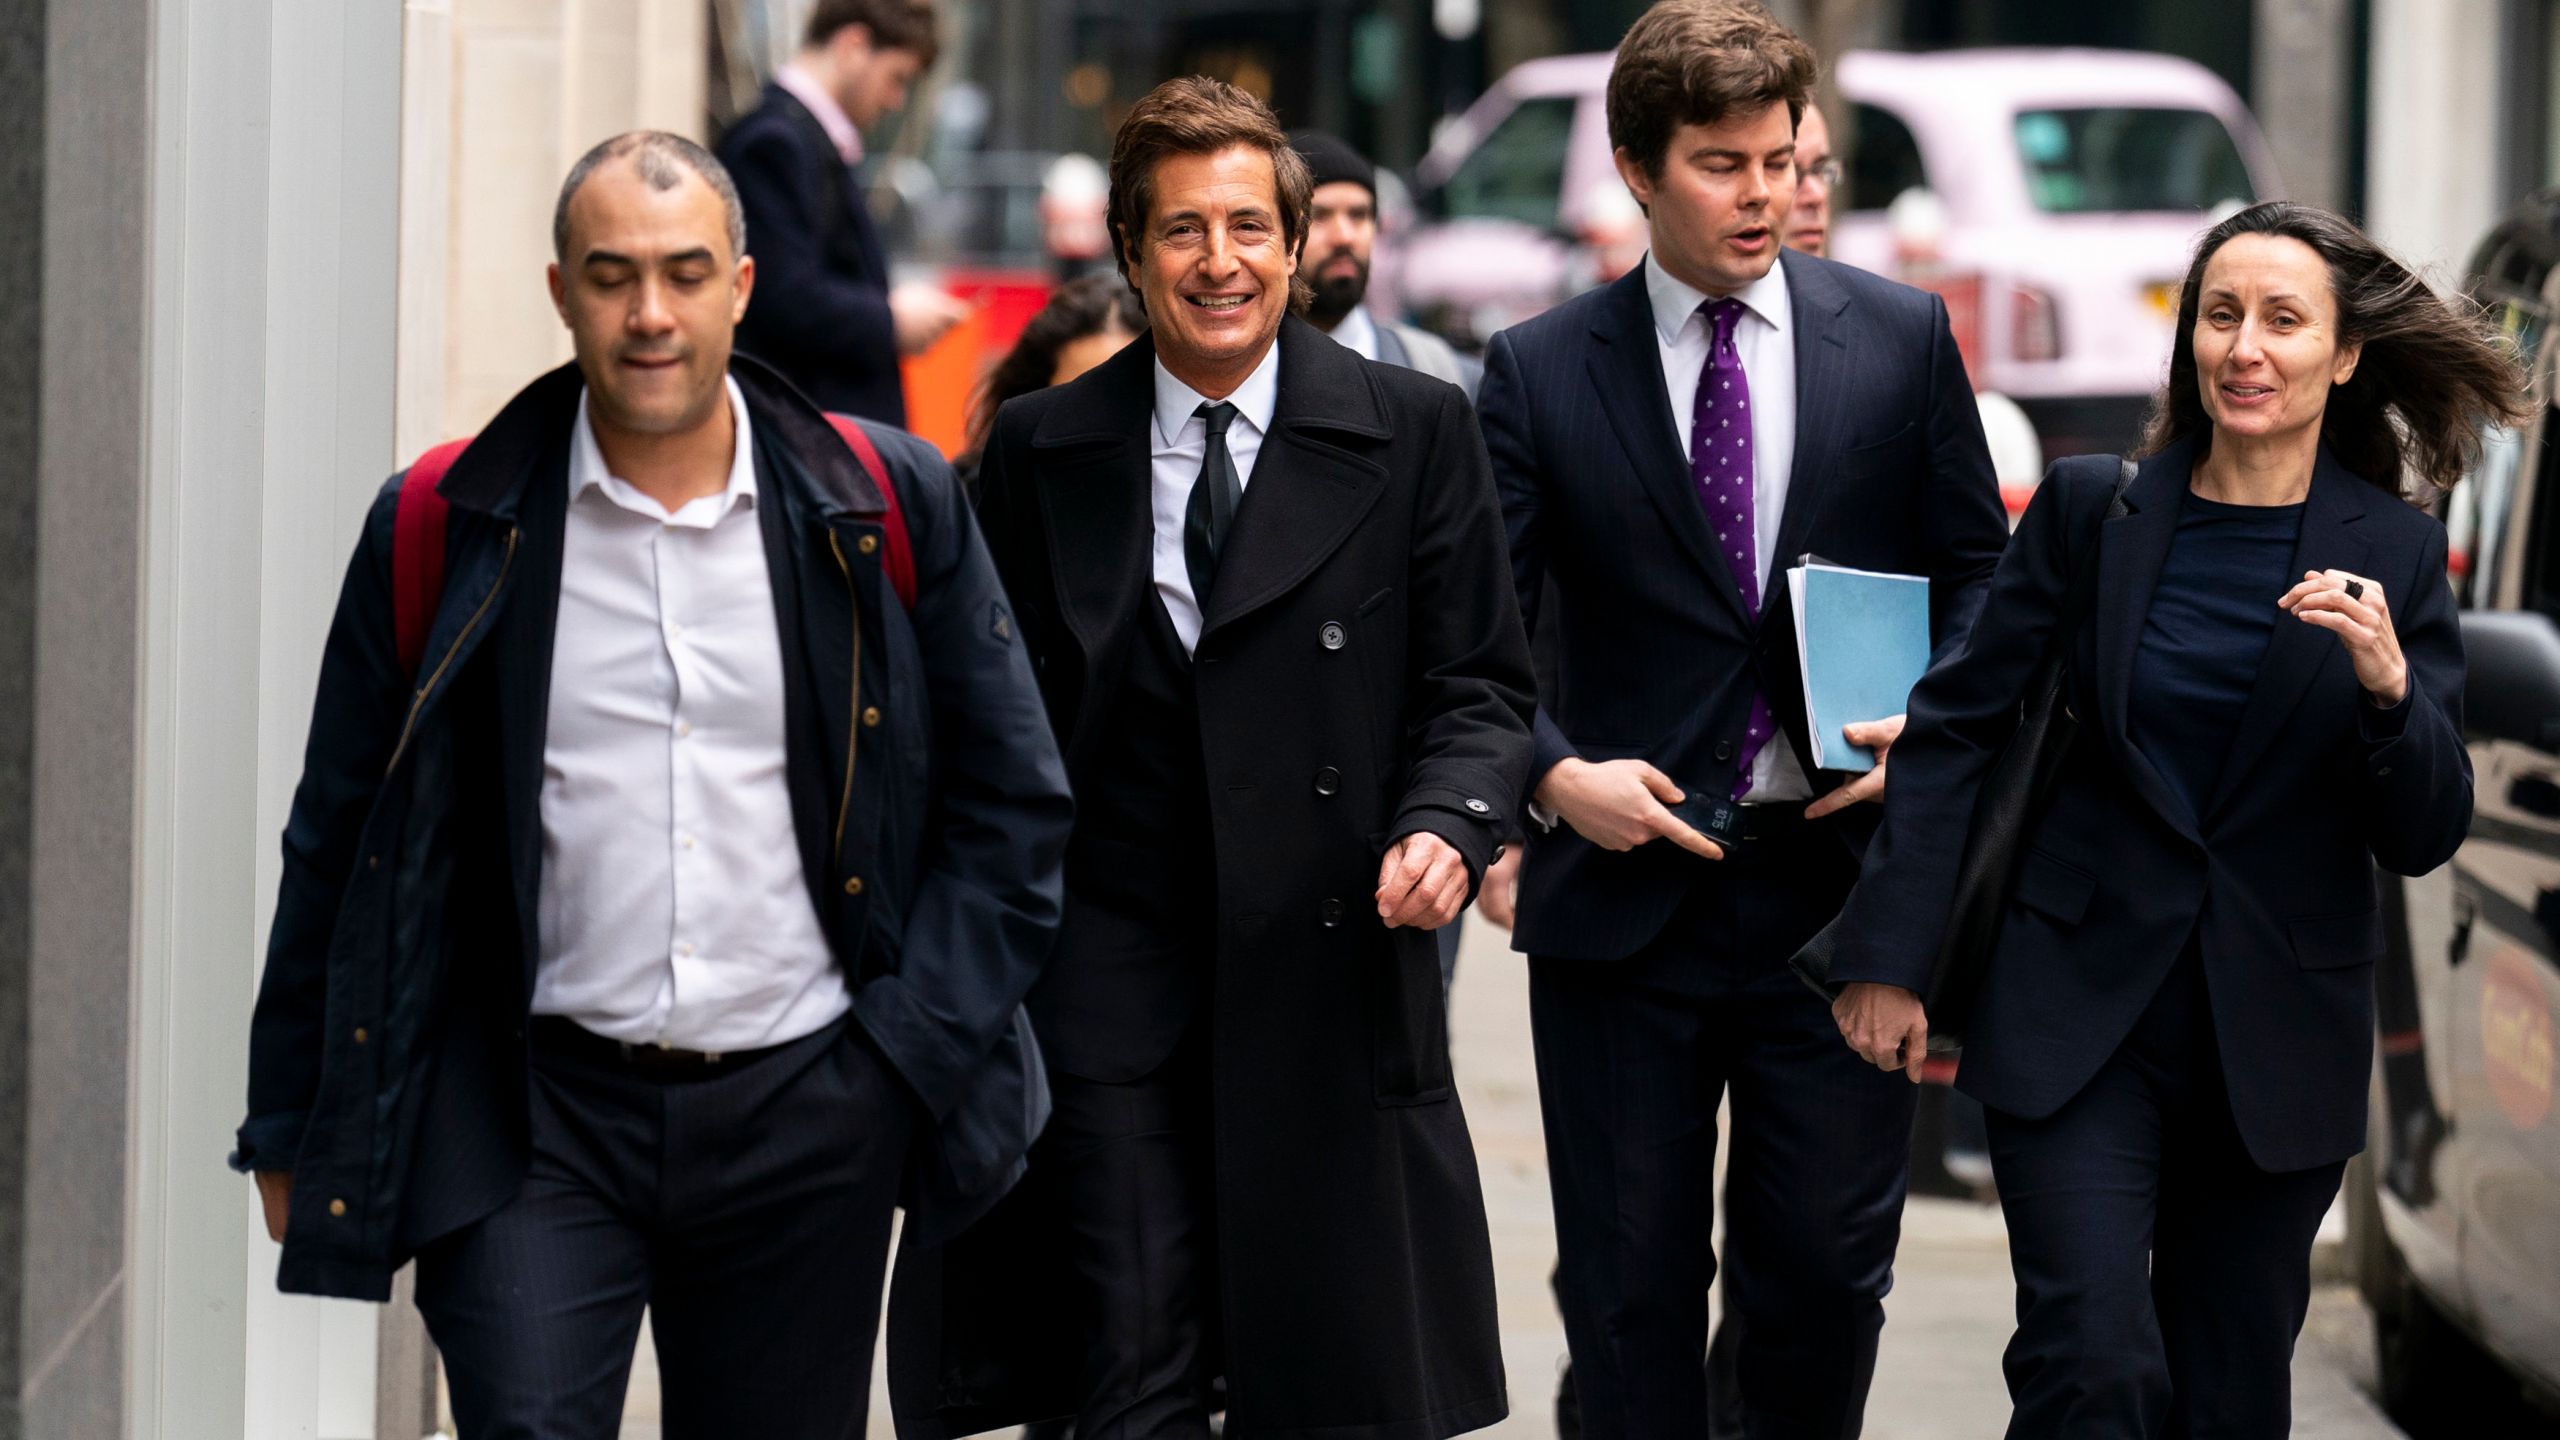 Attorney David Sherborne, second from left, at the Rolls Buildings, central London, Wednesday March 20, 2024. Prince Harry alleged Thursday, March 21, 2024, that the publisher of The Sun tabloid unlawfully intercepted phone calls of his late mother, Princess Diana, and father, now King Charles III, as he sought to expand his privacy invasion lawsuit against News Group Newspapers. (Jordan Pettitt/PA via AP)